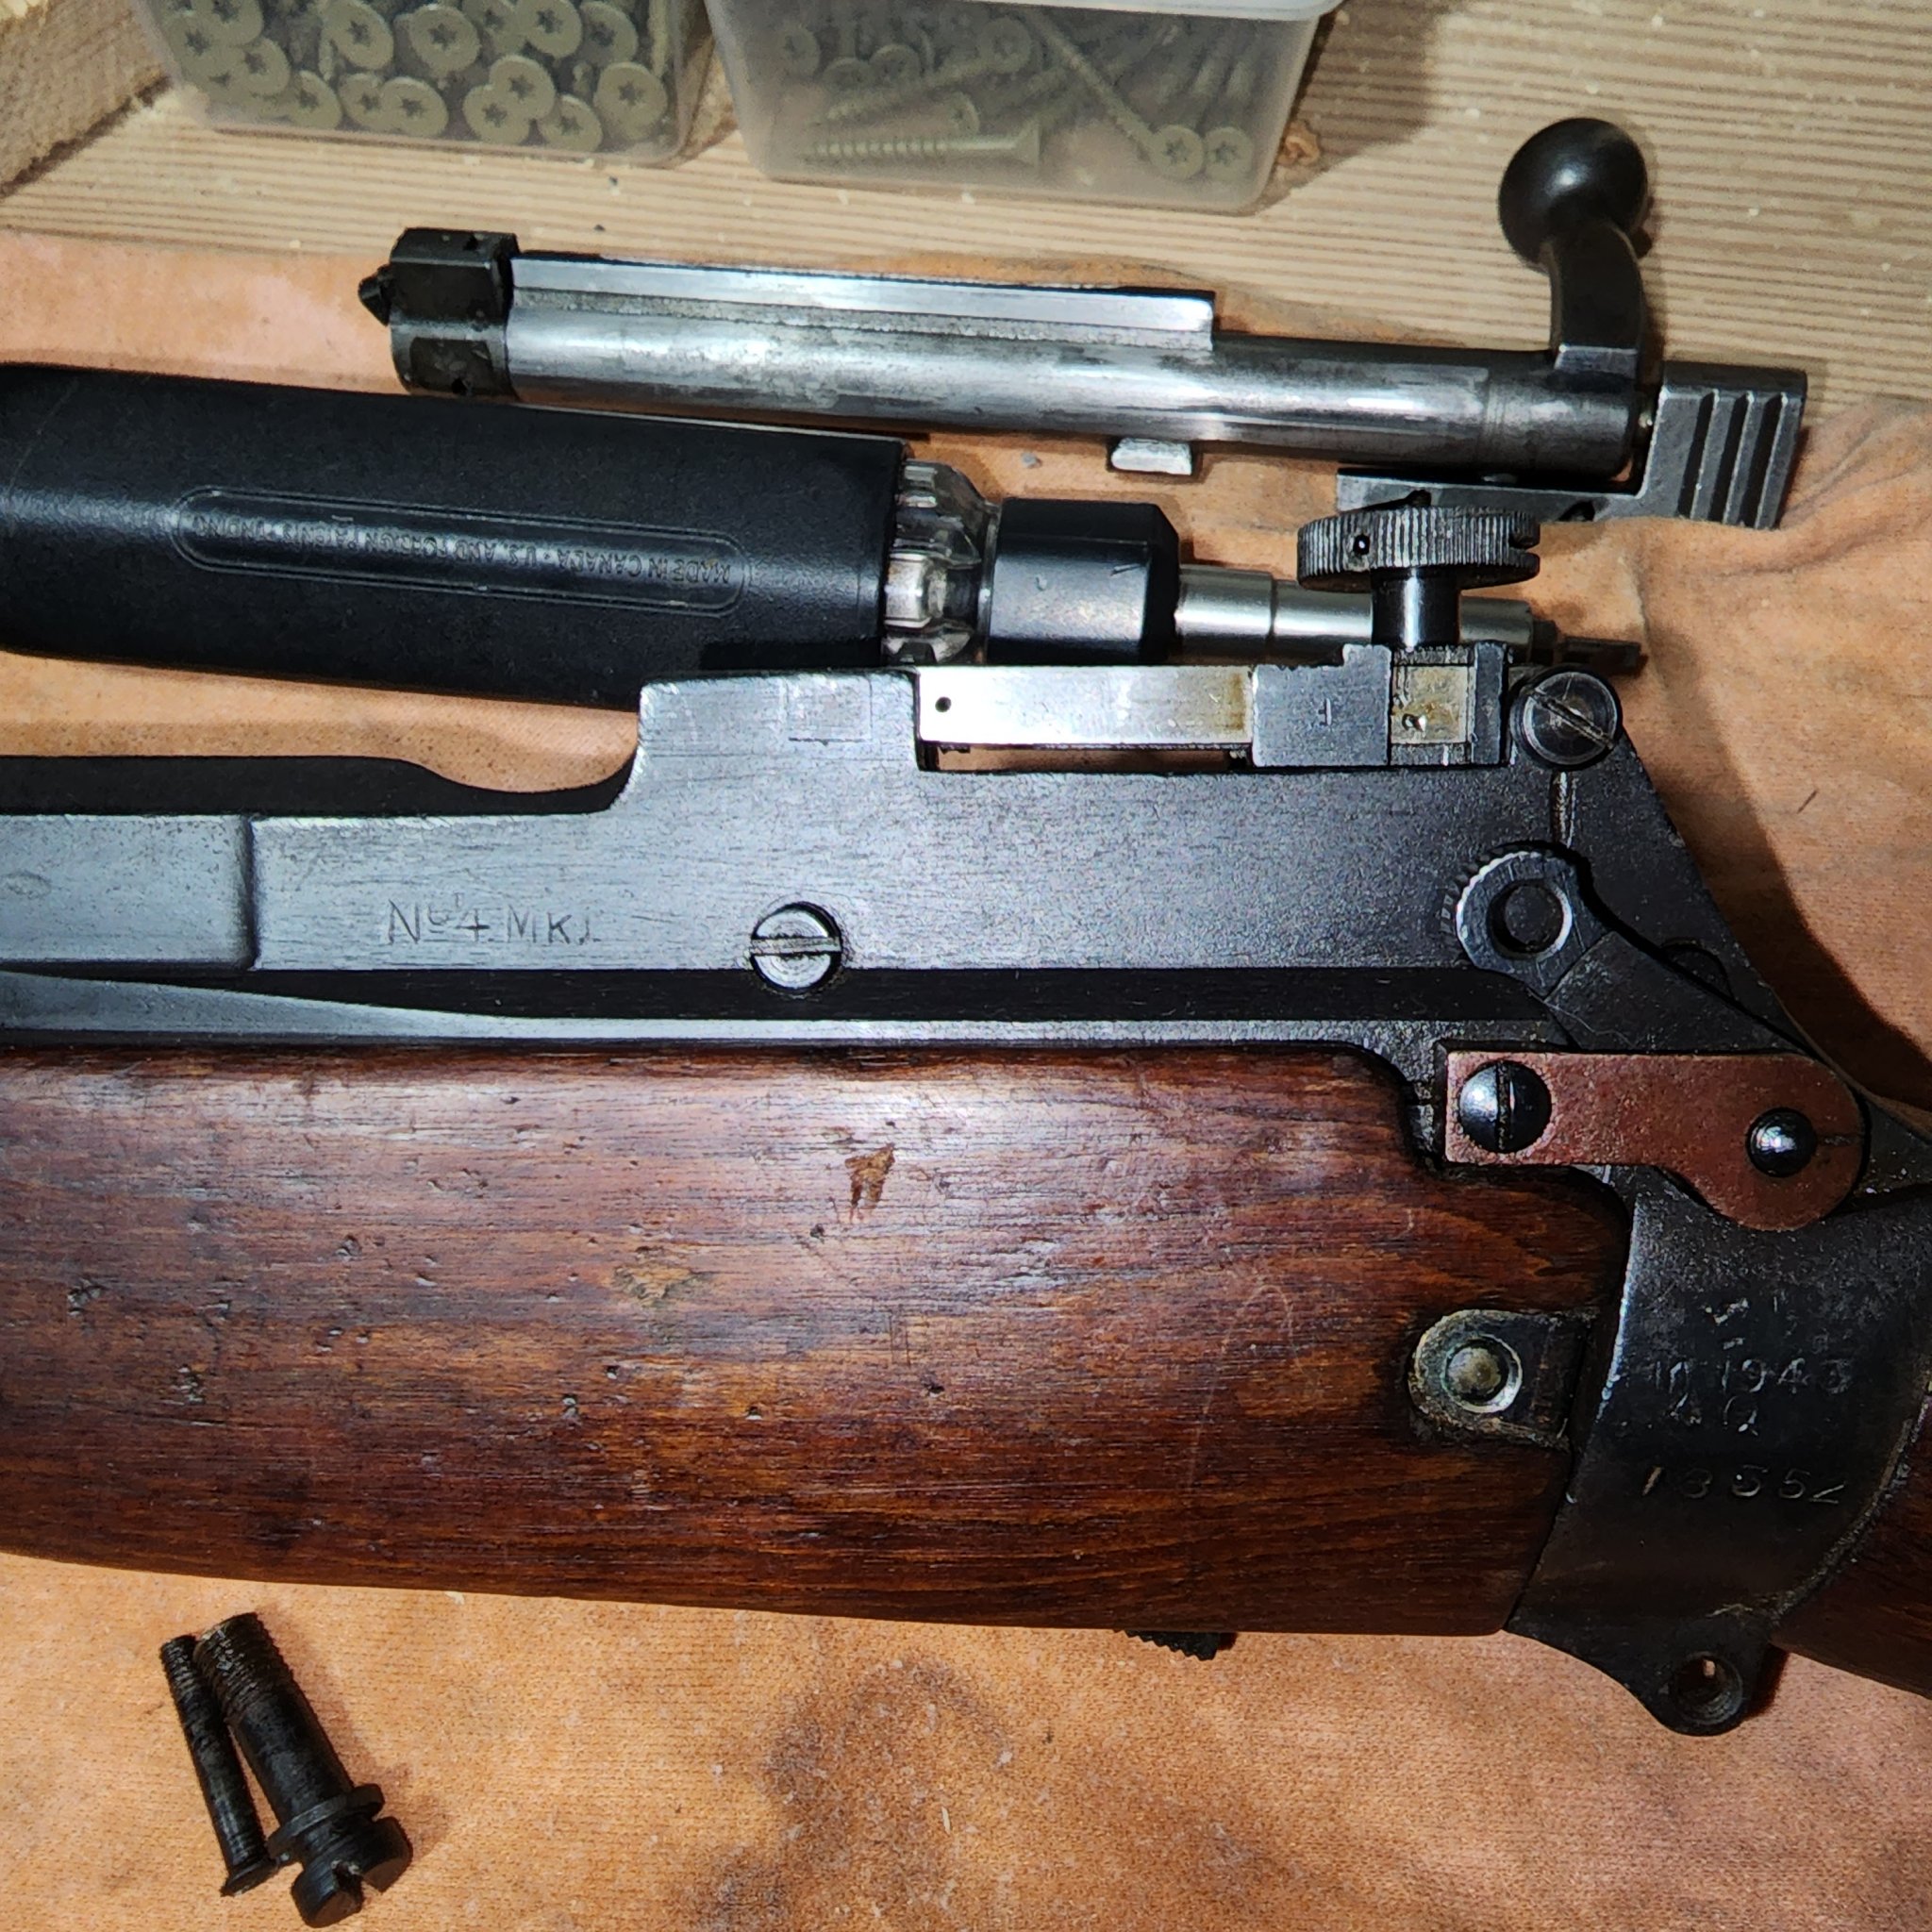 Long Branch Surplus Lee Enfield No.4 MK. 1* 1944 Mismatch Rifle with  Correct Bolt Style.